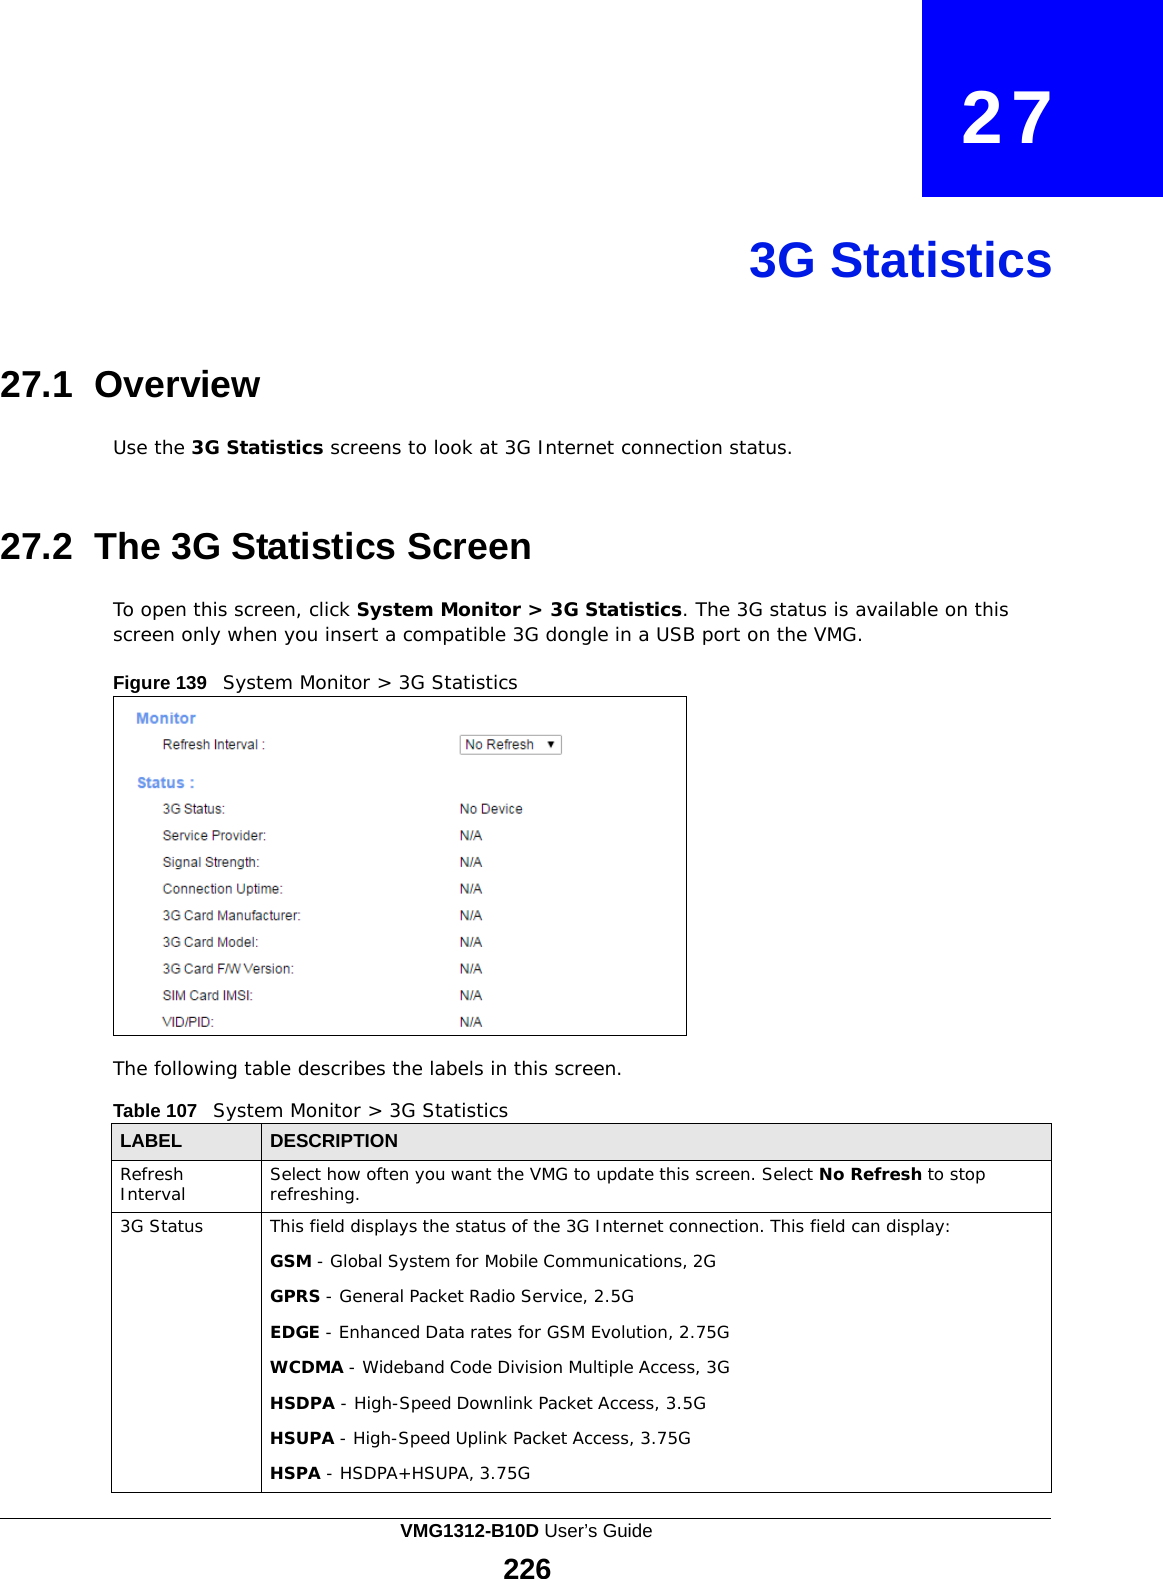    27     3G Statistics     27.1 Overview  Use the 3G Statistics screens to look at 3G Internet connection status.    27.2 The 3G Statistics Screen  To open this screen, click System Monitor &gt; 3G Statistics. The 3G status is available on this screen only when you insert a compatible 3G dongle in a USB port on the VMG.  Figure 139   System Monitor &gt; 3G Statistics                  The following table describes the labels in this screen.  Table 107   System Monitor &gt; 3G Statistics  LABEL DESCRIPTION Refresh Interval Select how often you want the VMG to update this screen. Select No Refresh to stop refreshing. 3G Status This field displays the status of the 3G Internet connection. This field can display:  GSM - Global System for Mobile Communications, 2G  GPRS - General Packet Radio Service, 2.5G  EDGE - Enhanced Data rates for GSM Evolution, 2.75G WCDMA - Wideband Code Division Multiple Access, 3G HSDPA - High-Speed Downlink Packet Access, 3.5G HSUPA - High-Speed Uplink Packet Access, 3.75G HSPA - HSDPA+HSUPA, 3.75G VMG1312-B10D User’s Guide 226  